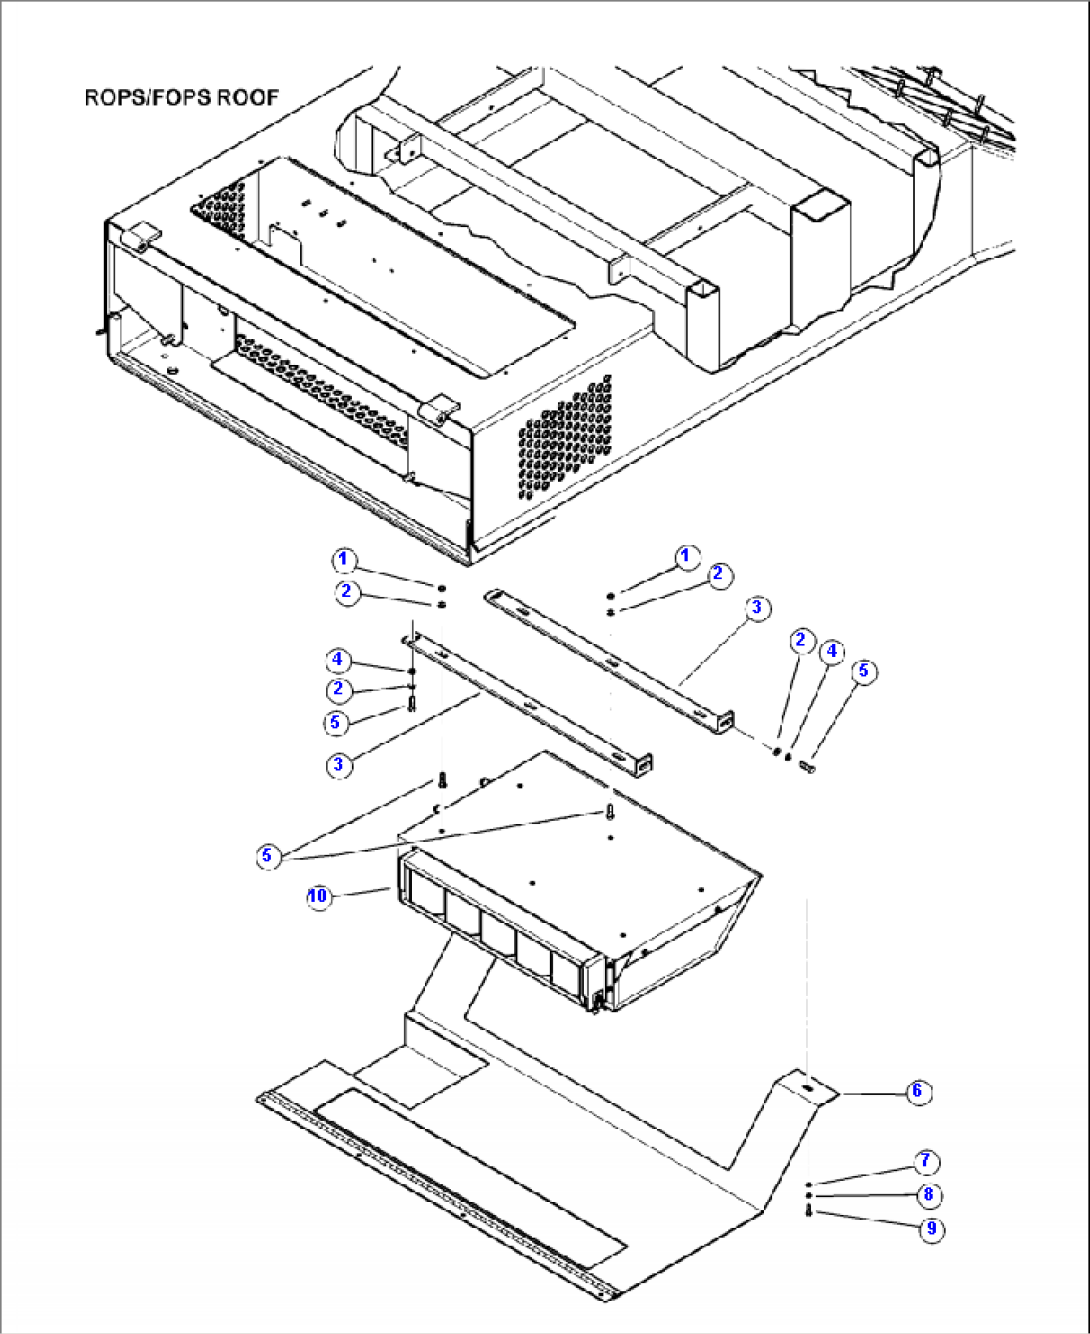 K0700-02A0 AIR CONDITIONER AND HEATER MOUNTING